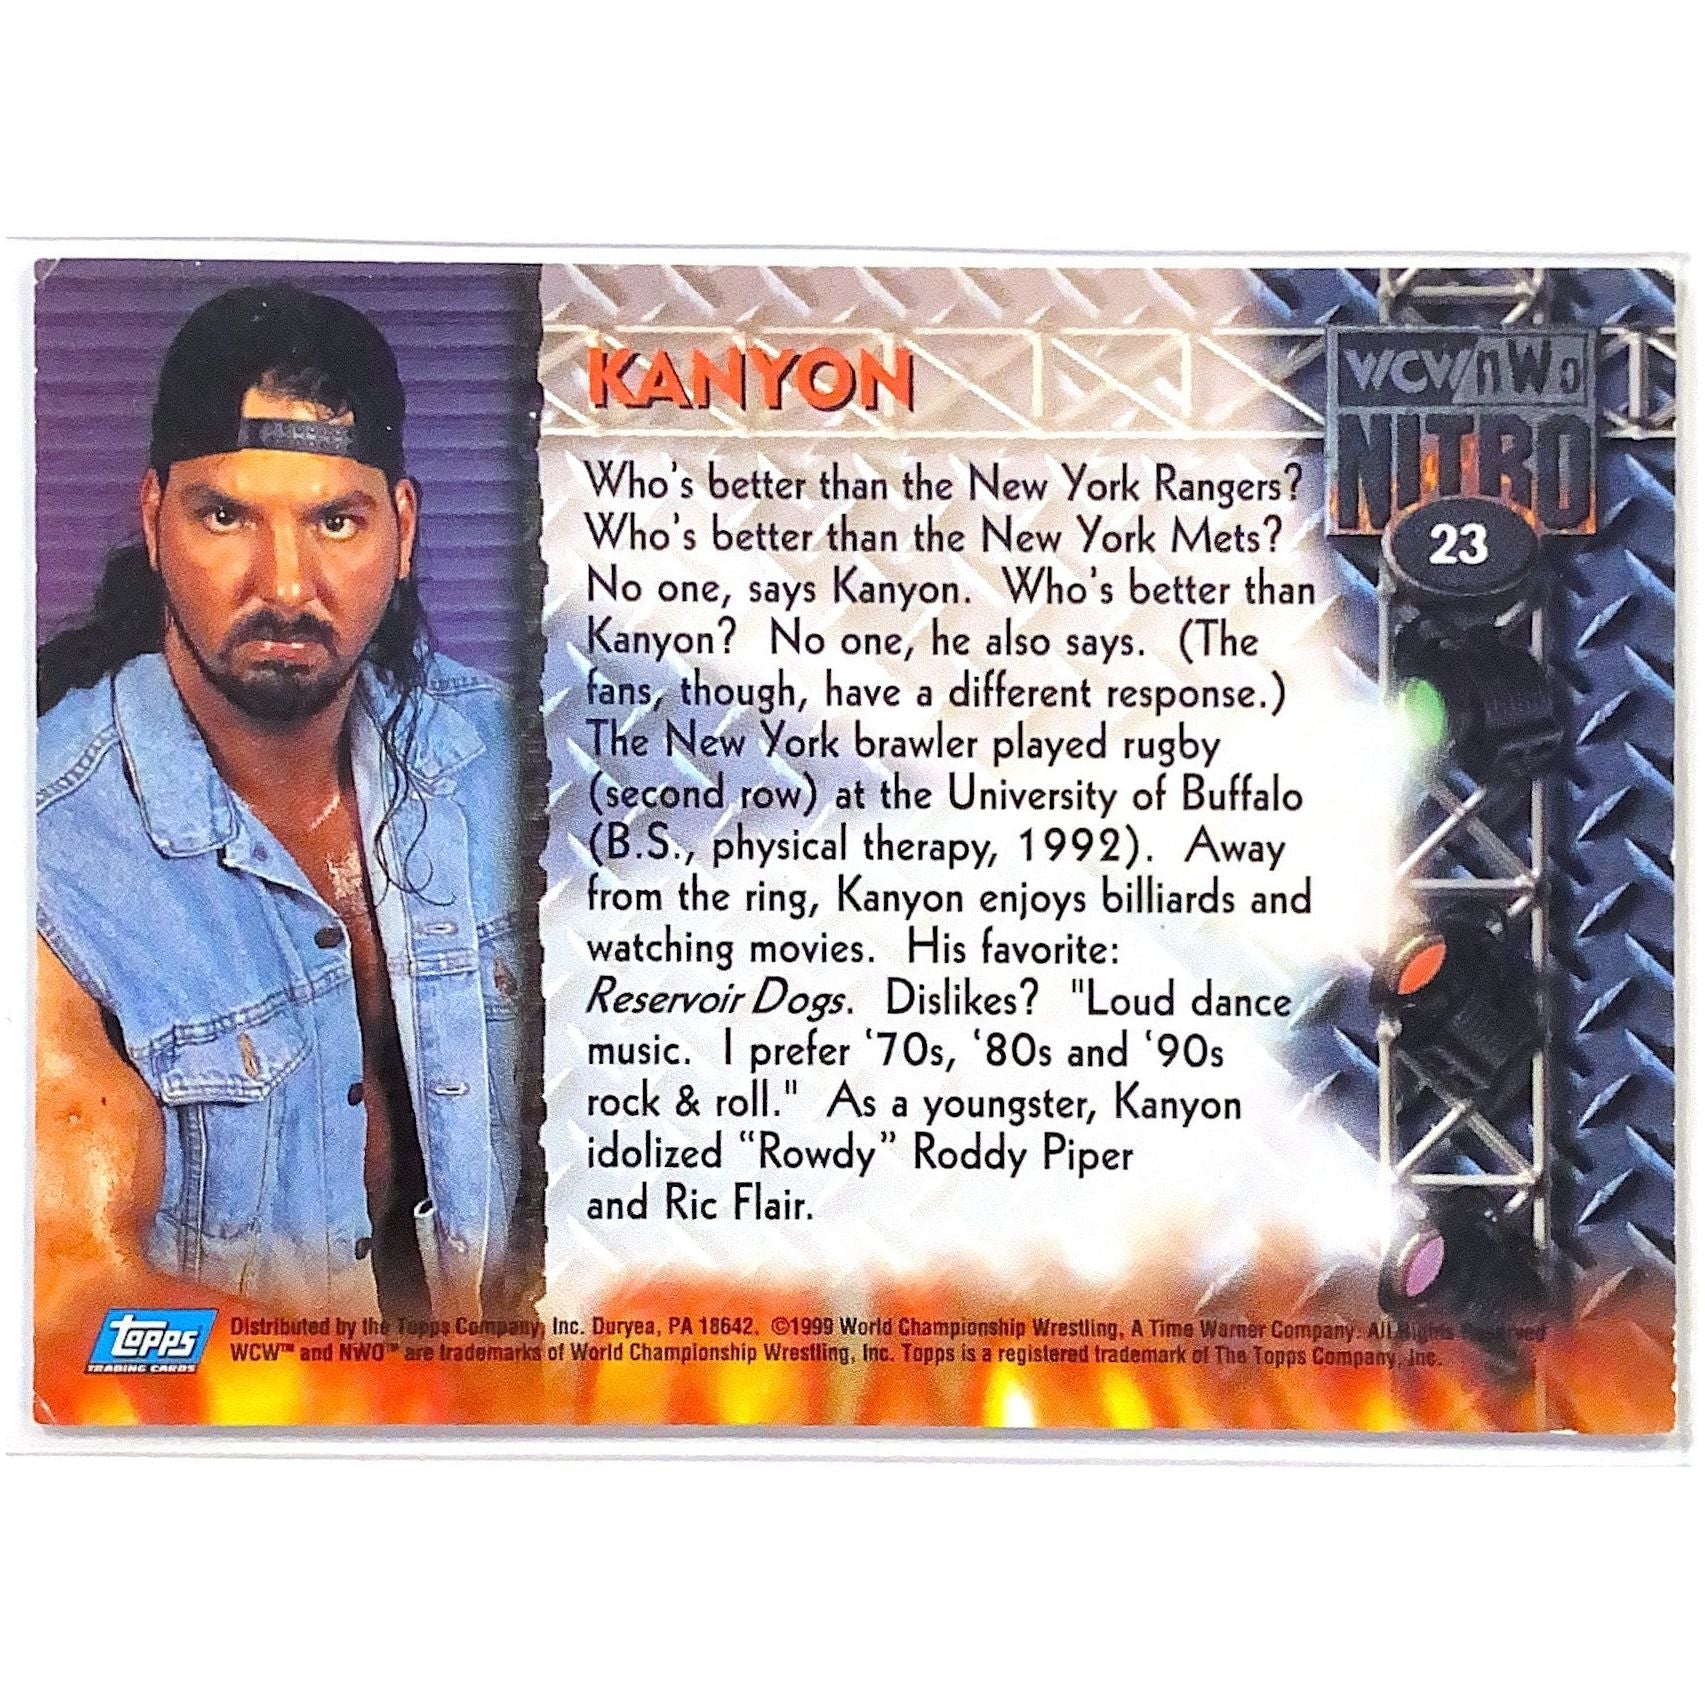  1999 Topps WCW NWO Nitro Kanyon #23  Local Legends Cards & Collectibles